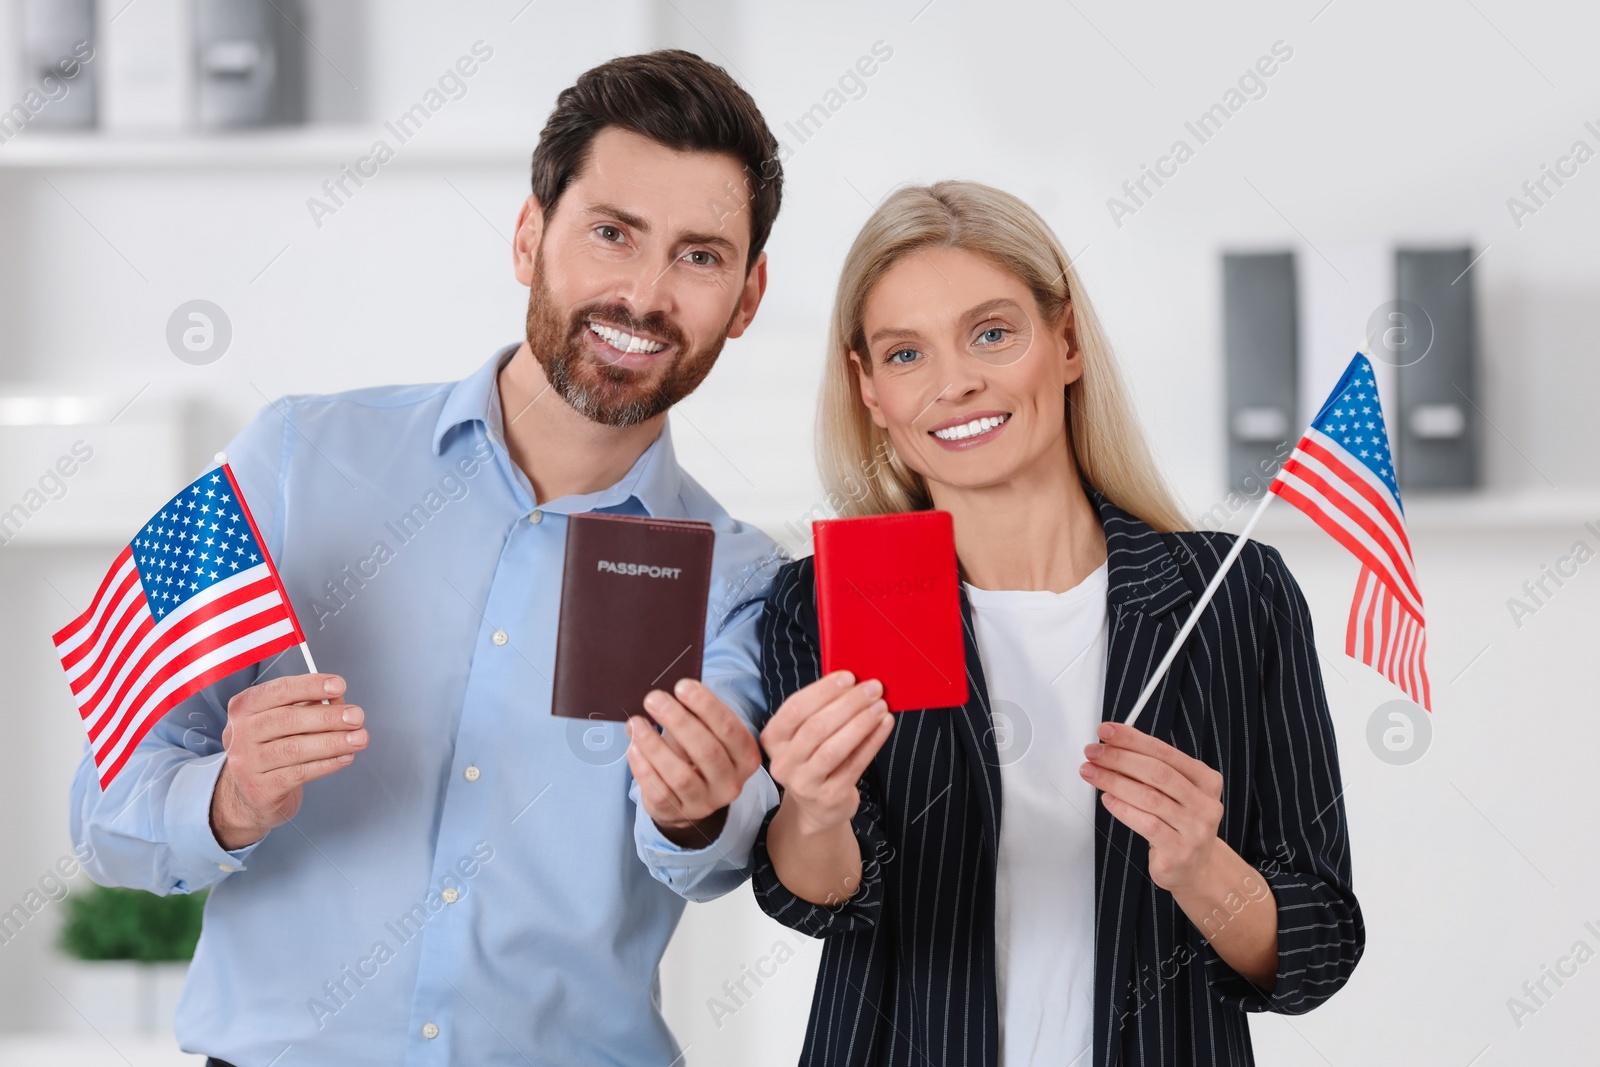 Photo of Immigration. Happy couple with passports and American flags indoors